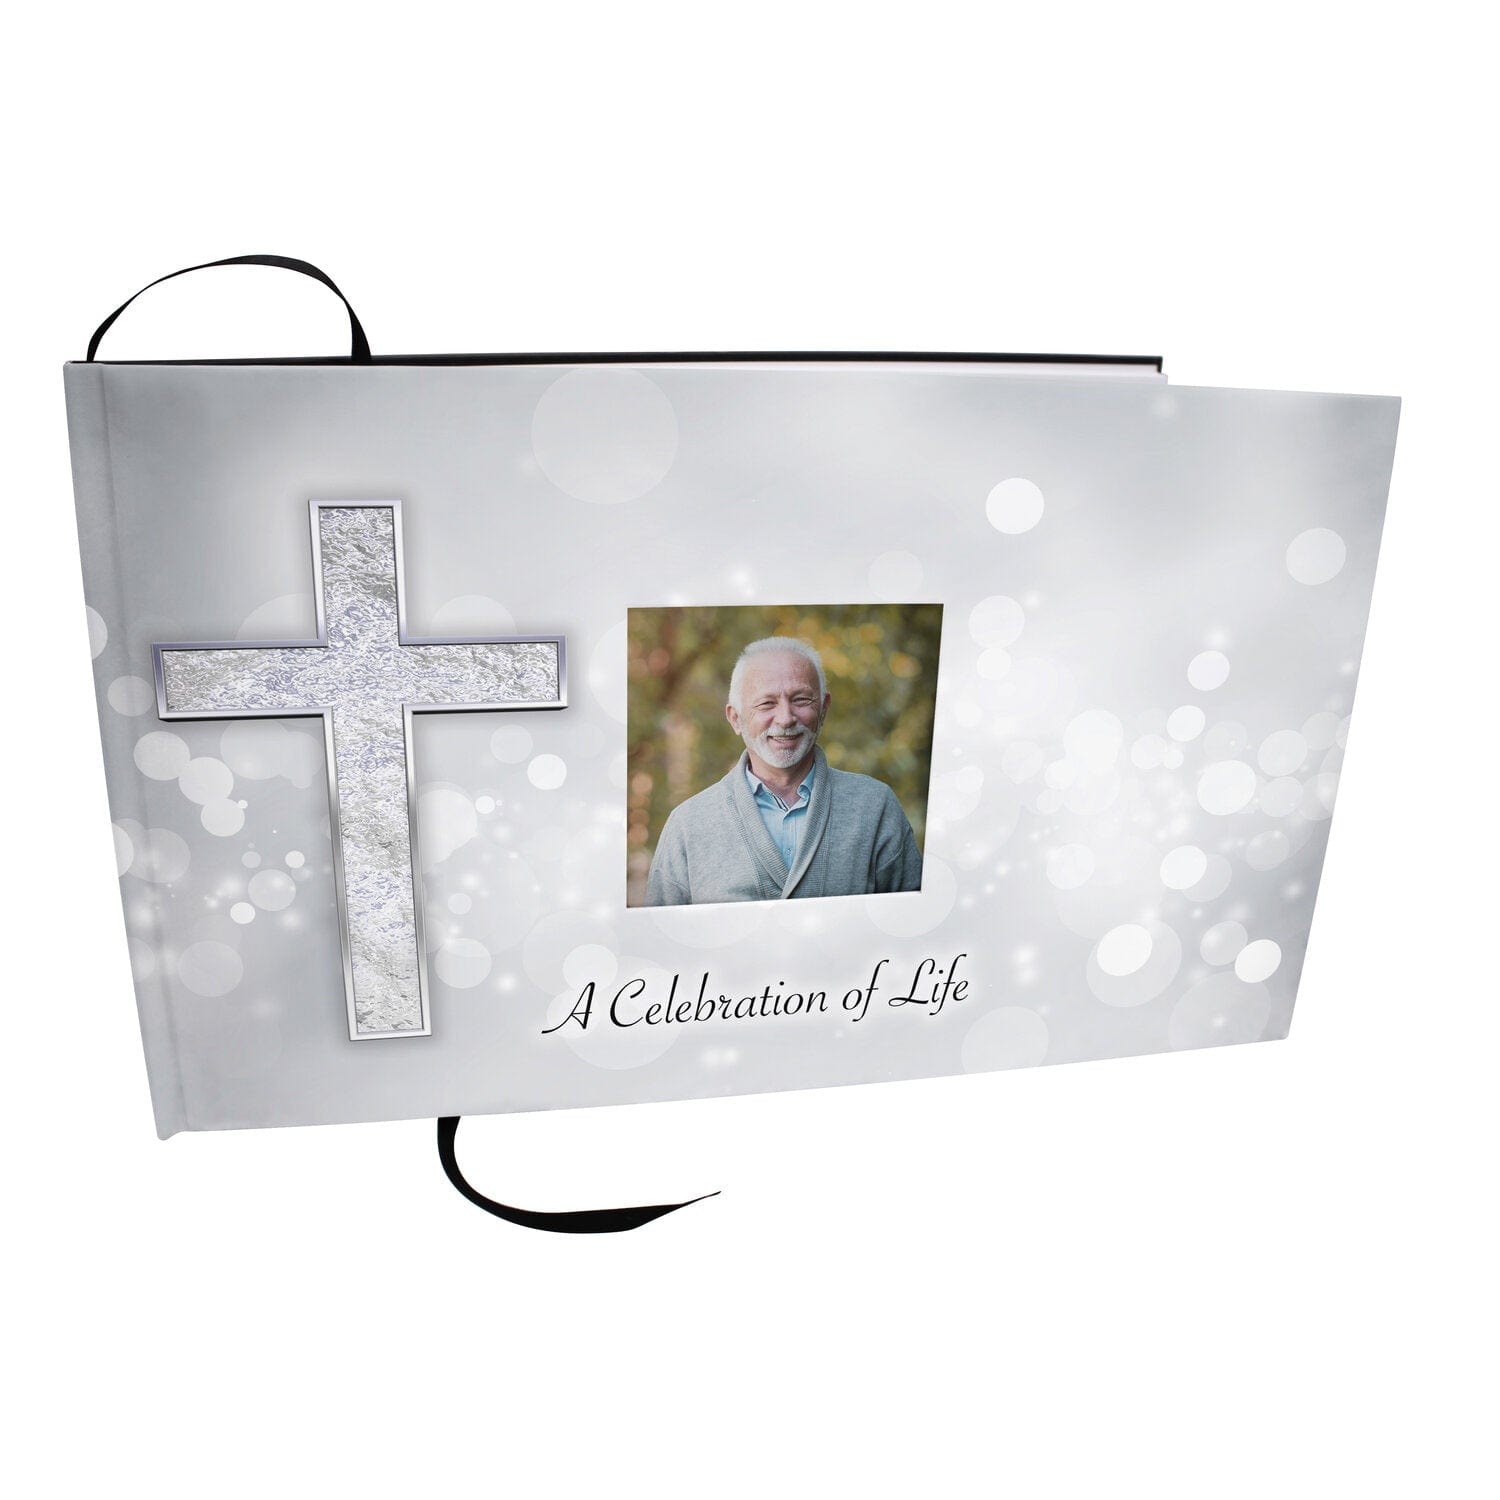 Commemorative Cremation Urns Silver Cross Matching Themed 'Celebration of Life' Guest Book for Funeral or Memorial Service